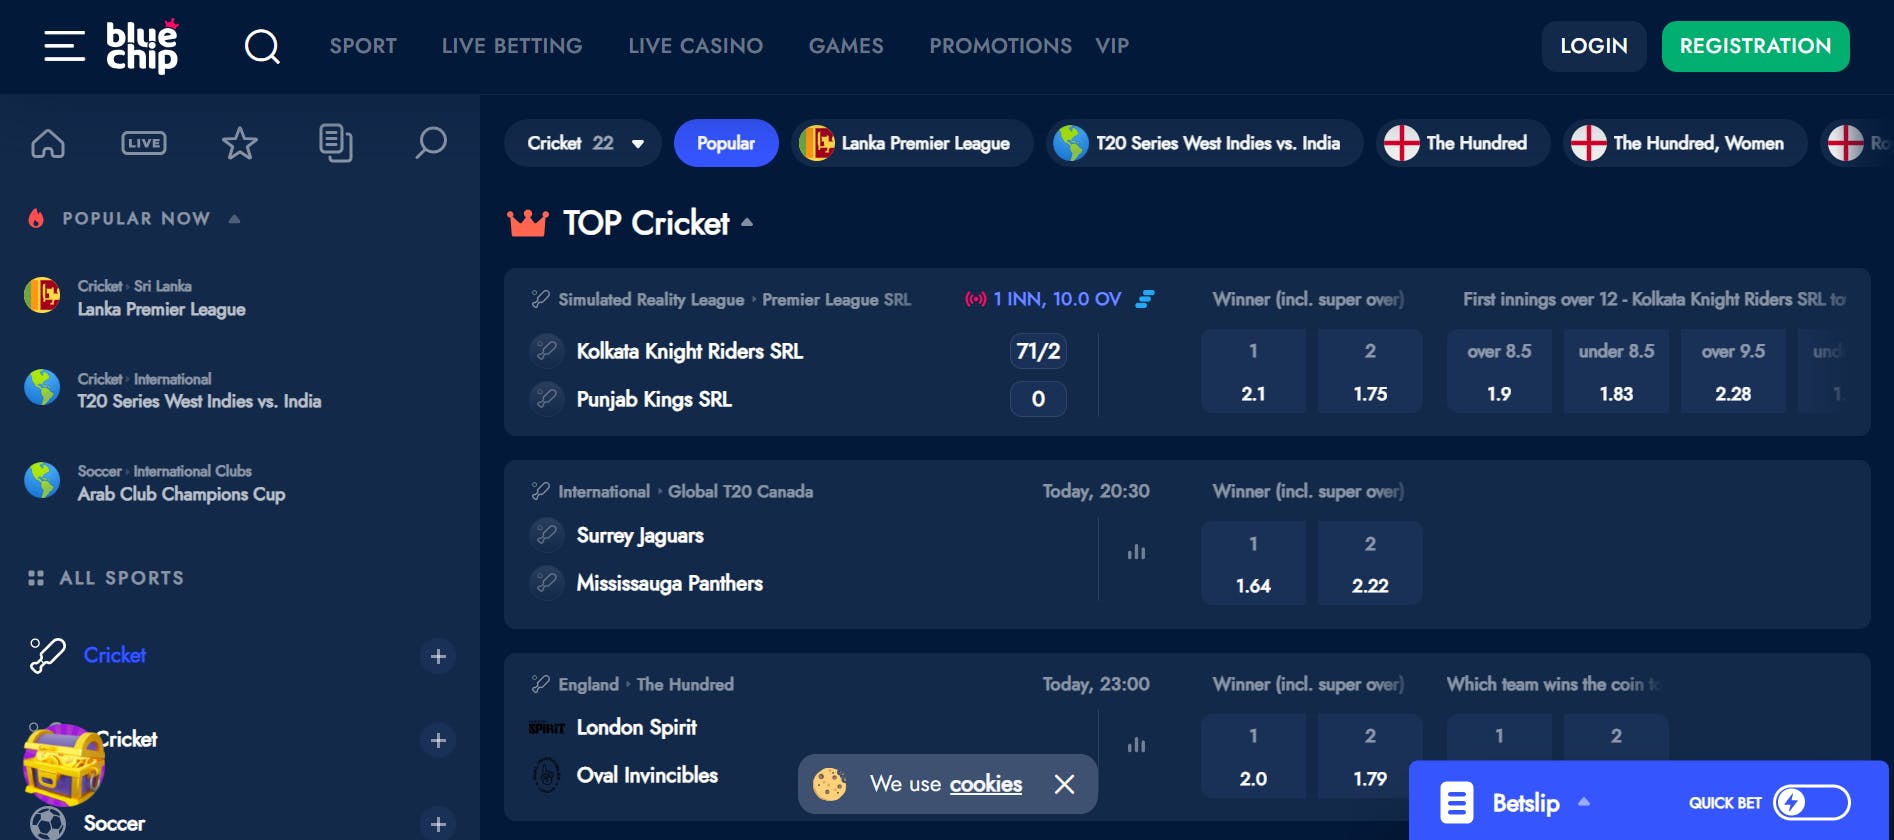 Cricket betting page on Bluechip